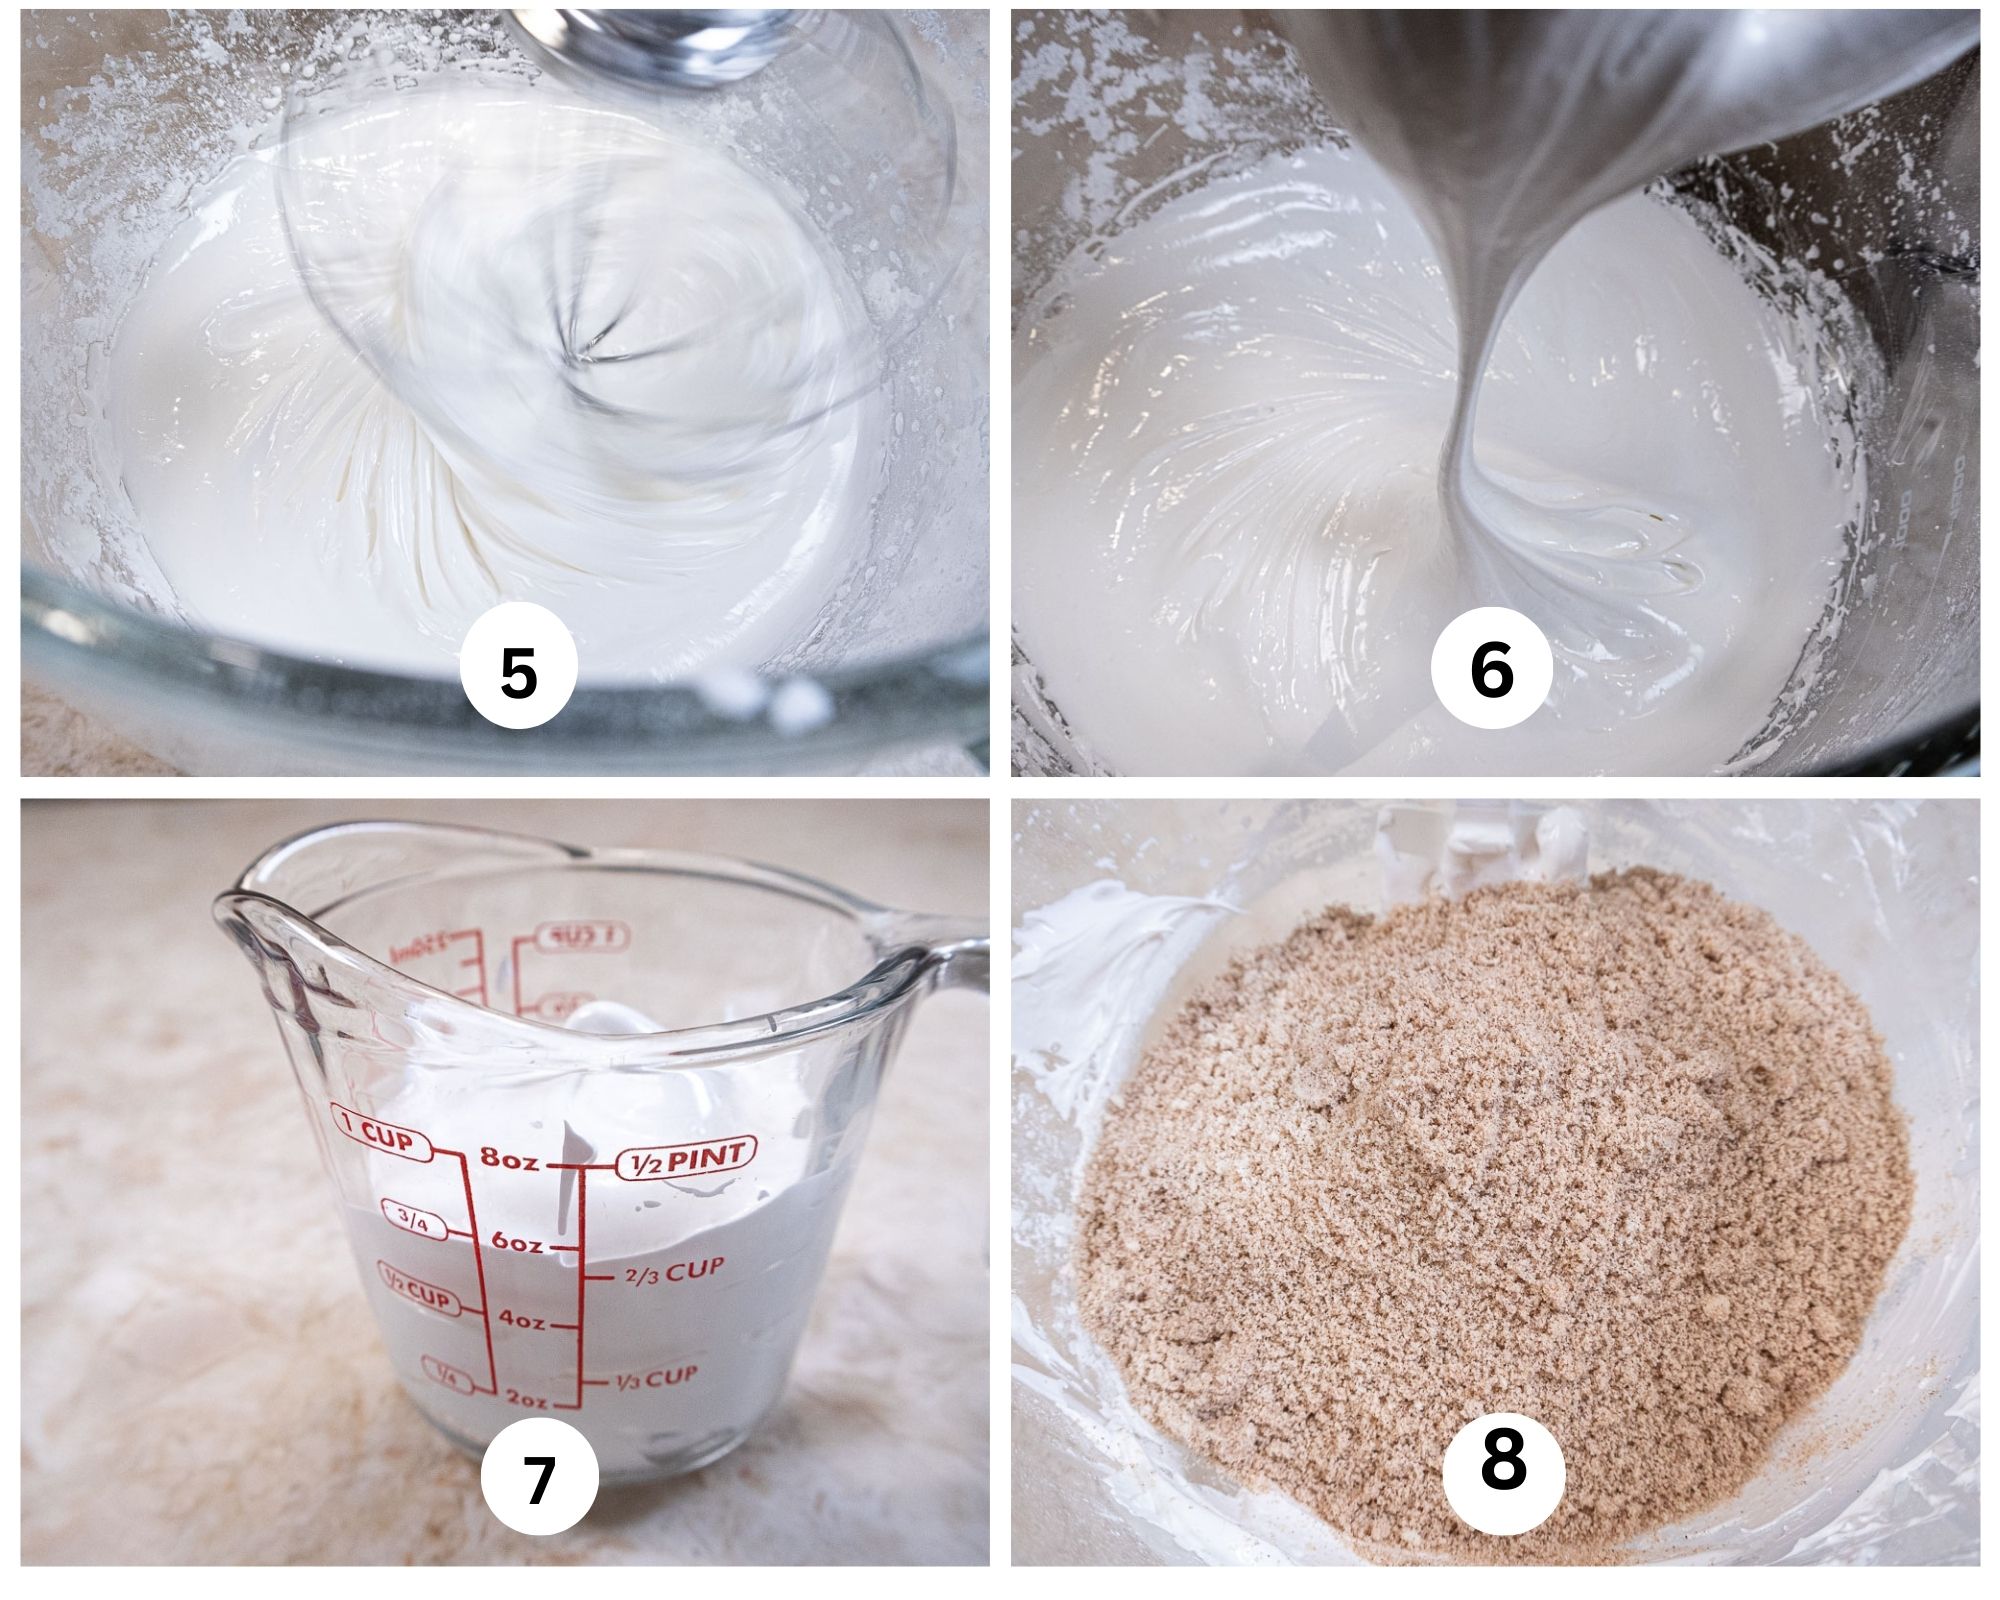 The second collage shows the egg whites beating, the egg whites finished beating, ¾ cup whites removed and the almond flour mixture being added to the mixing bowl. 